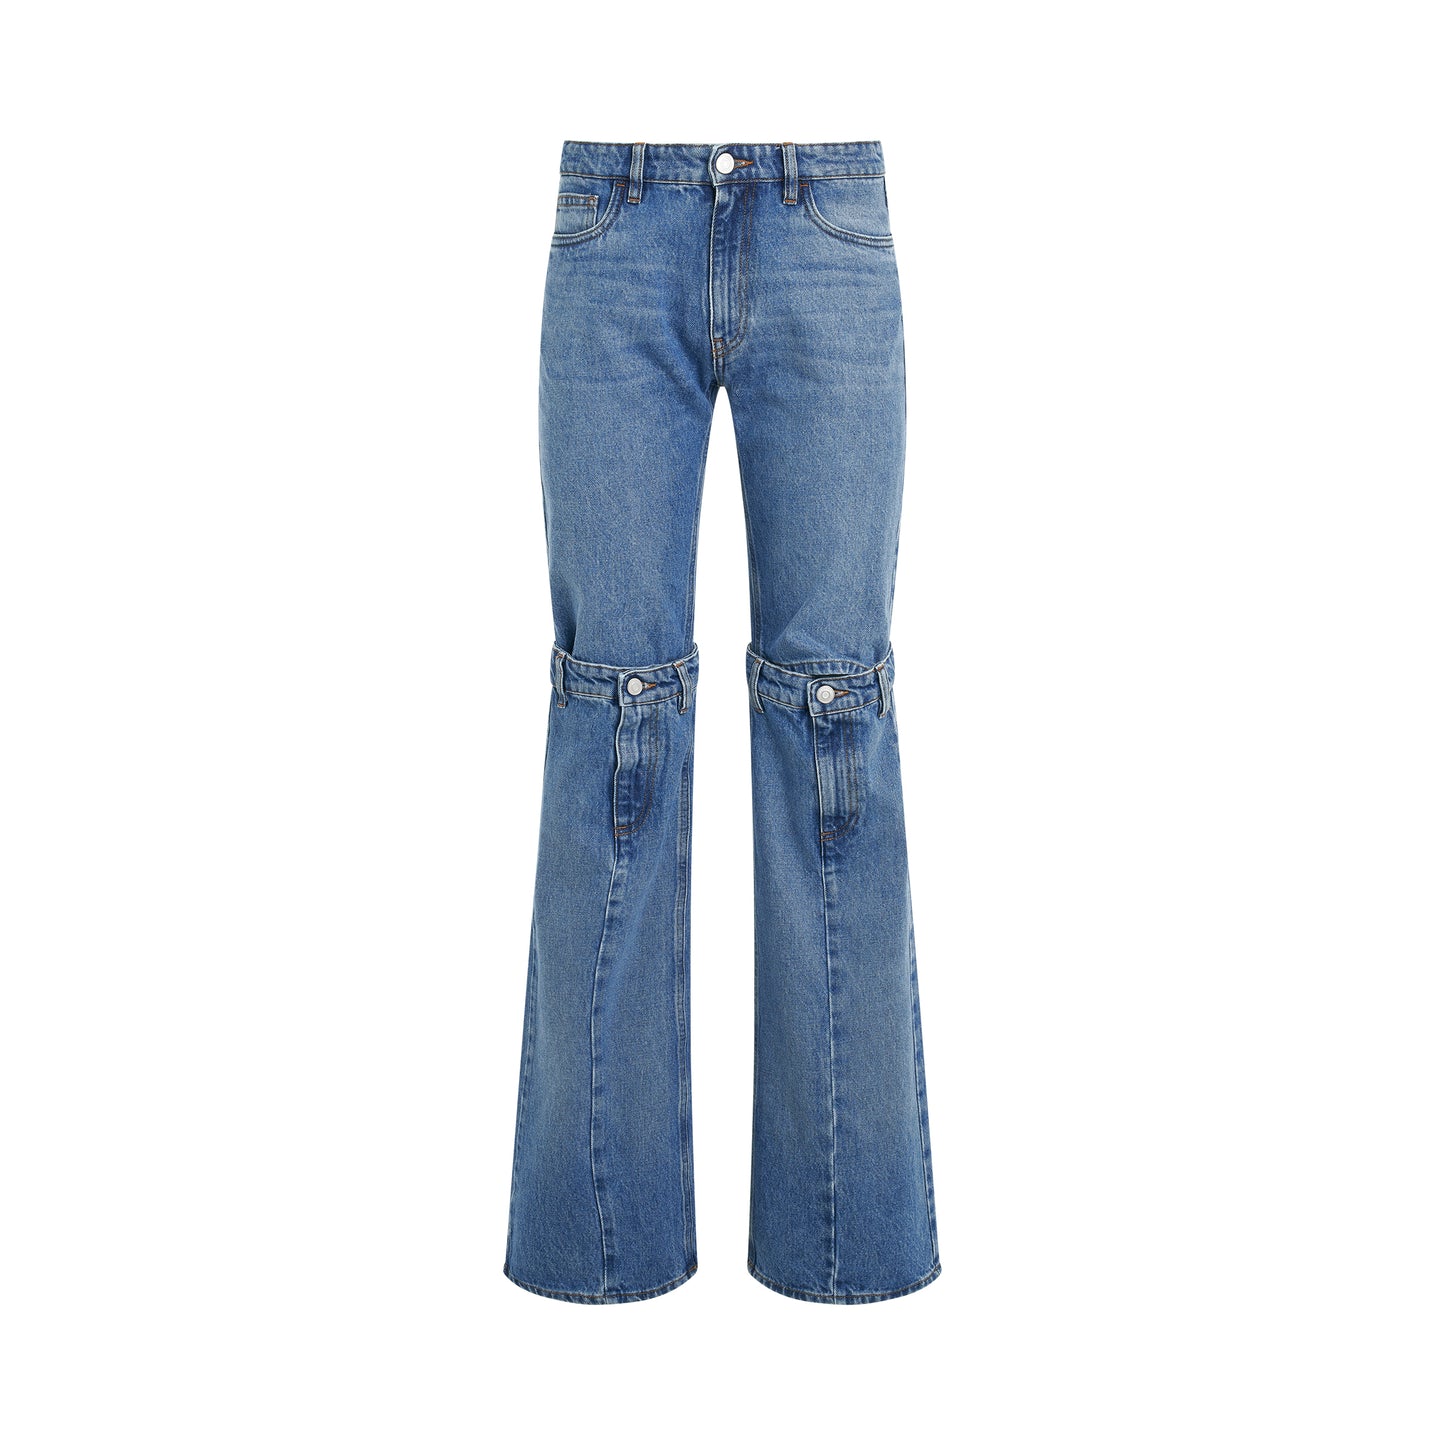 Open Knee Jeans in Washed Blue